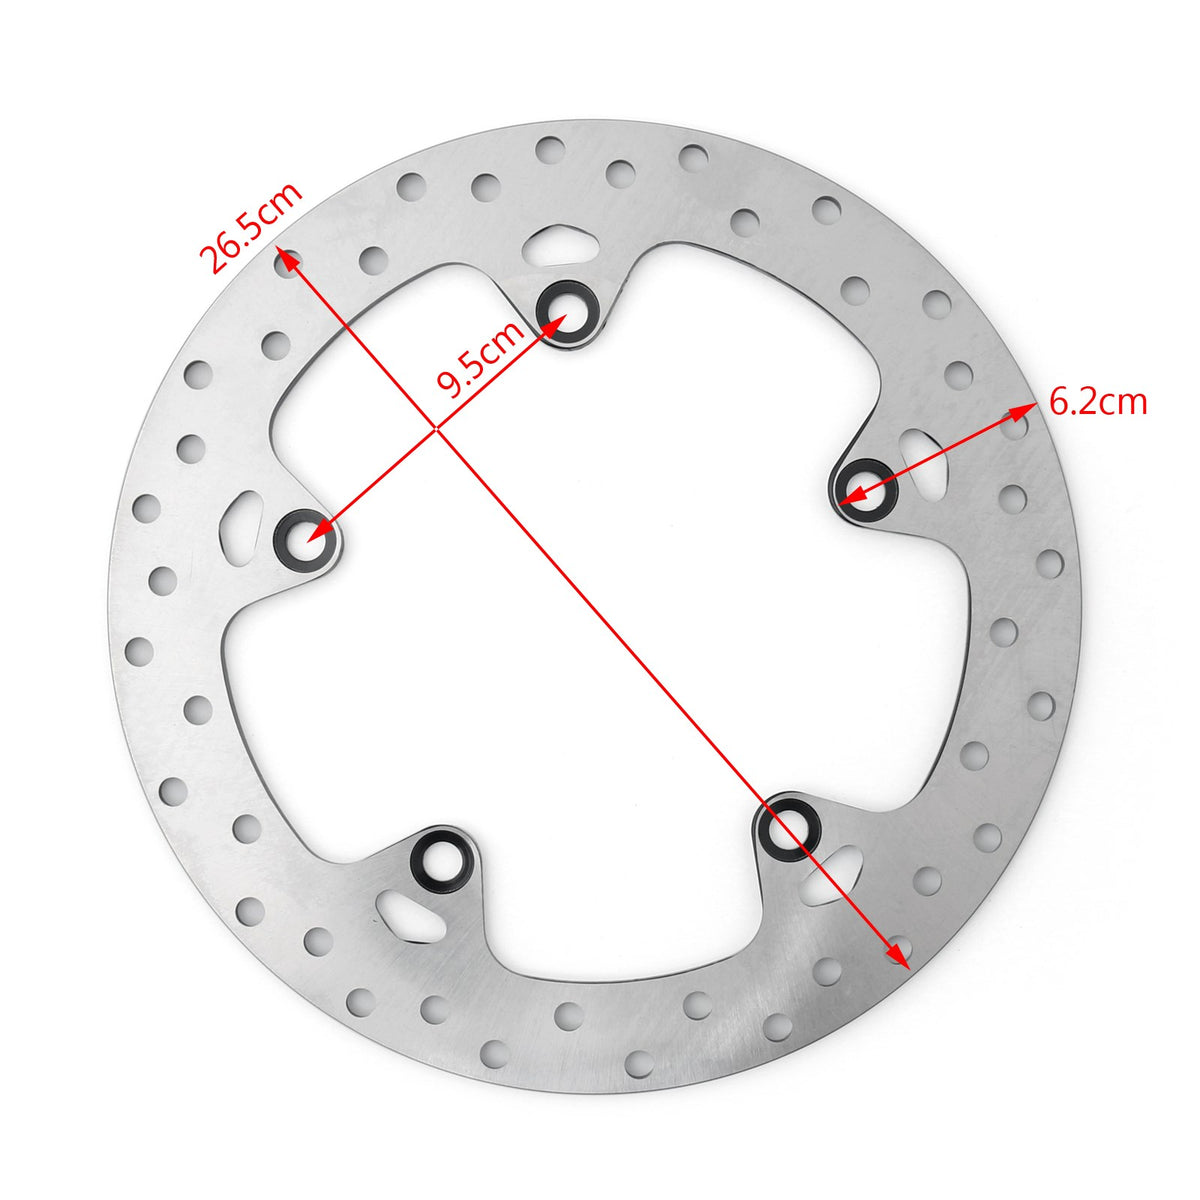 Rear Brake Rotor Disc Fit for BMW F 650 700 800 GS F800 R/S/ST/GT R nineT 06-15